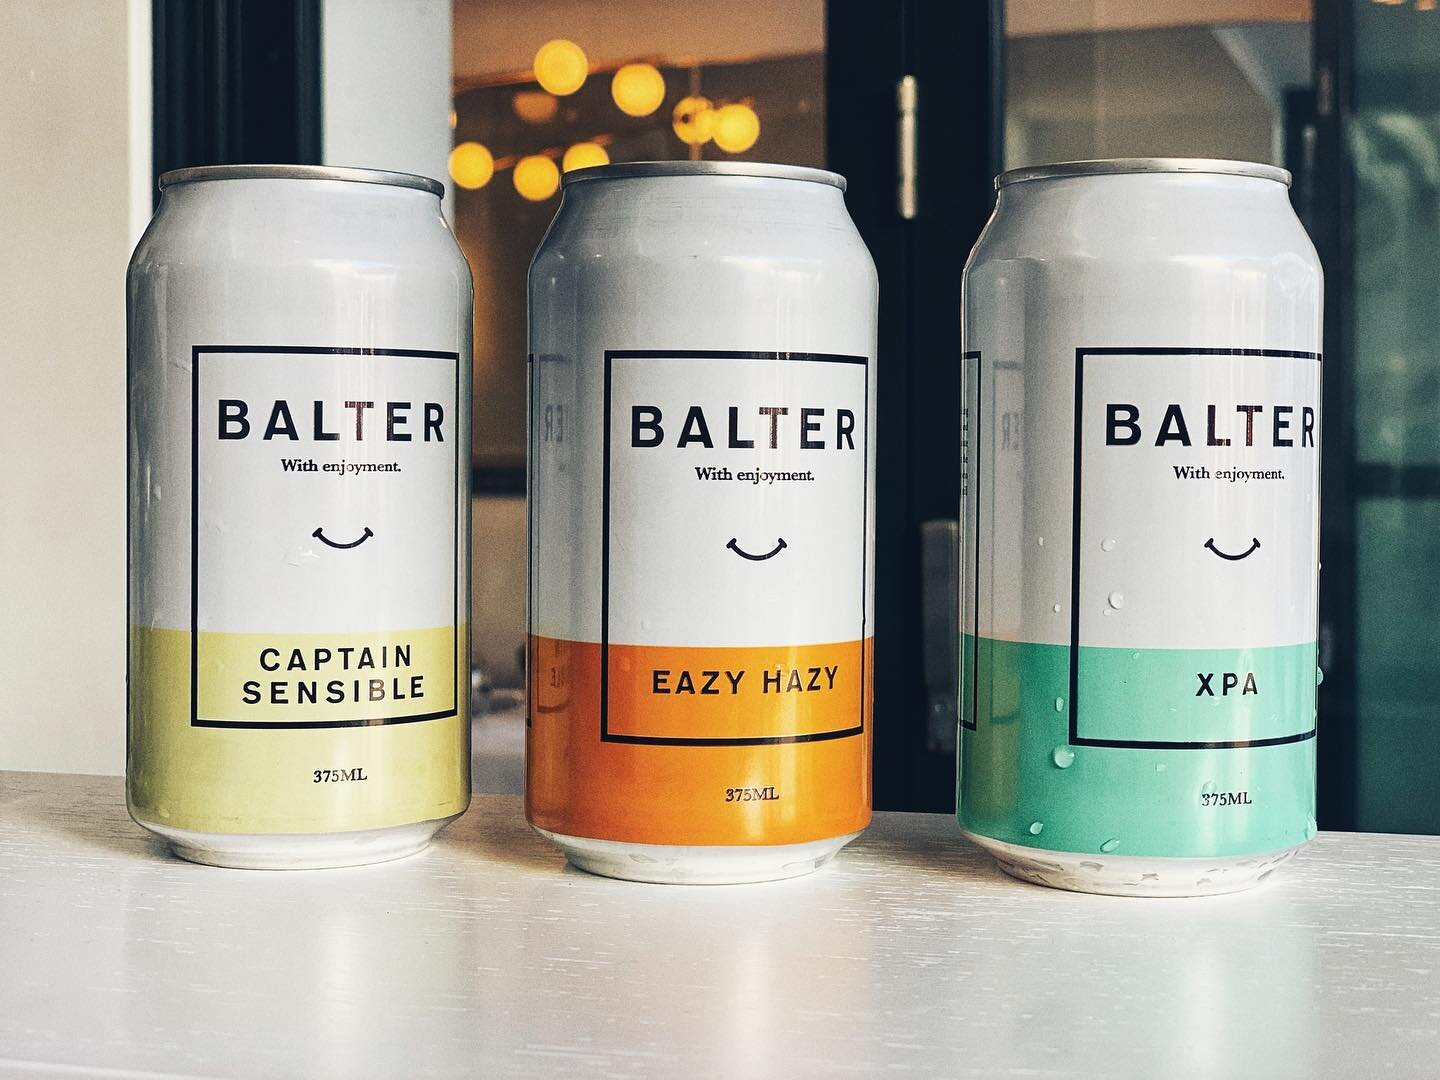 Feeling thirsty? Quench your thirst with one of these tasty little numbers 🤤 @balterbrewers by the can or grab a frothy schooey! @bluesonbroadbeach